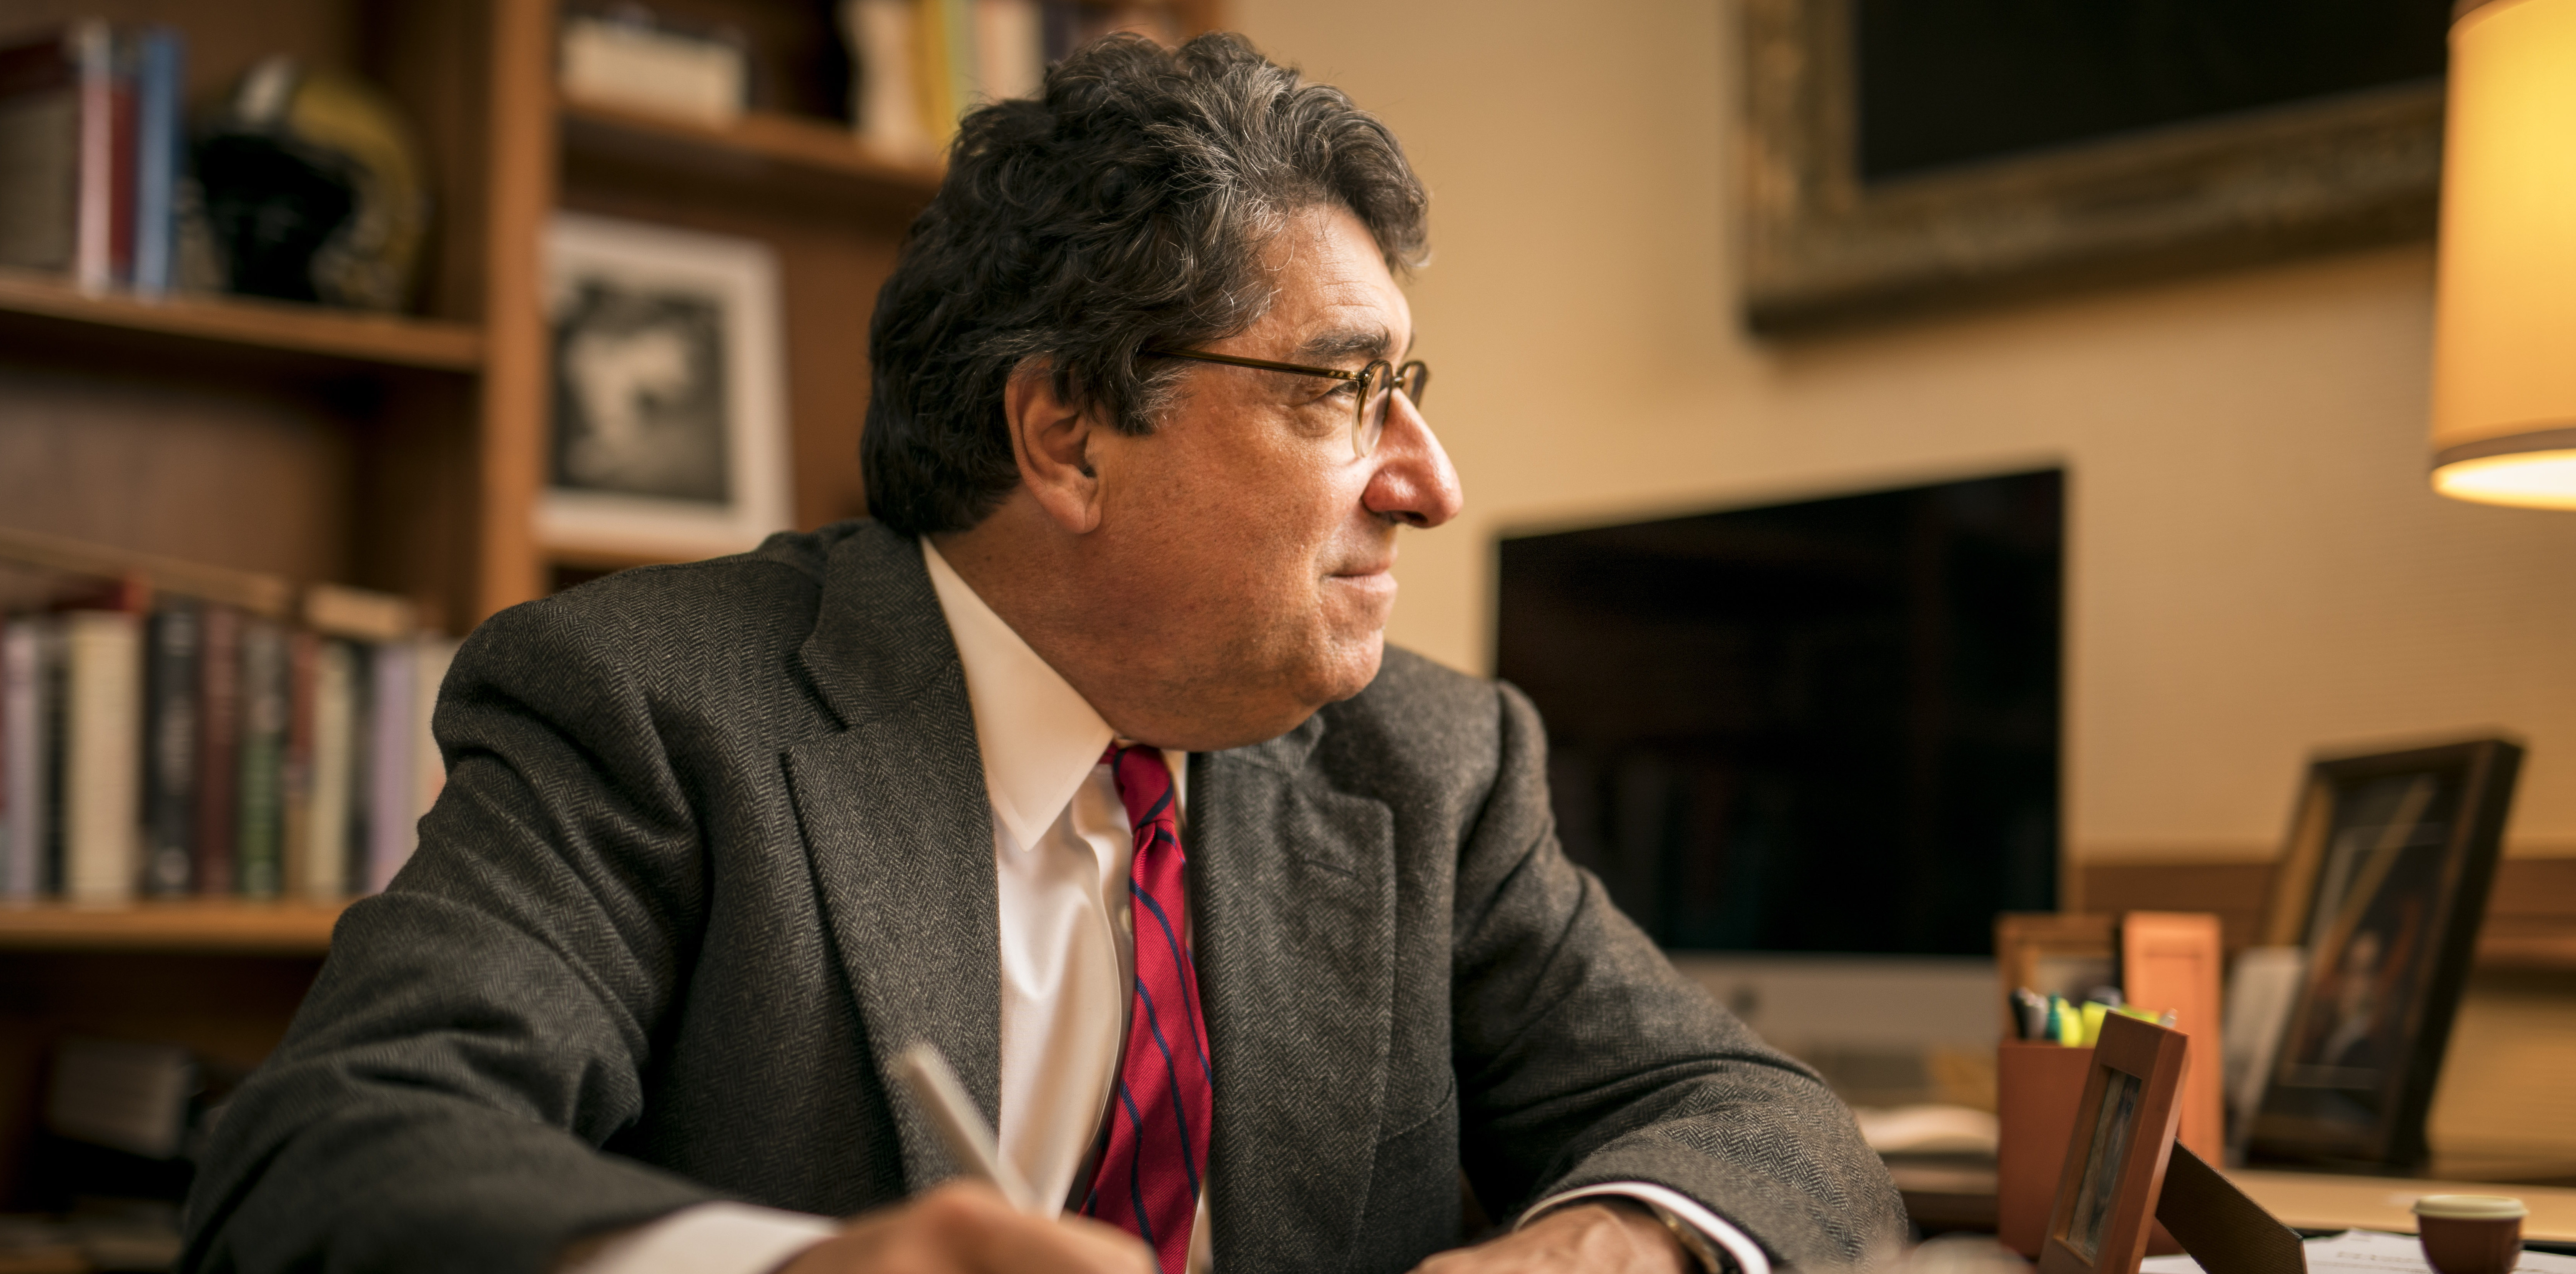 Photograph of Chancellor Nicholas S. Zeppos sitting at his desk, looking away from the camera, in his office in Kirkland Hall.